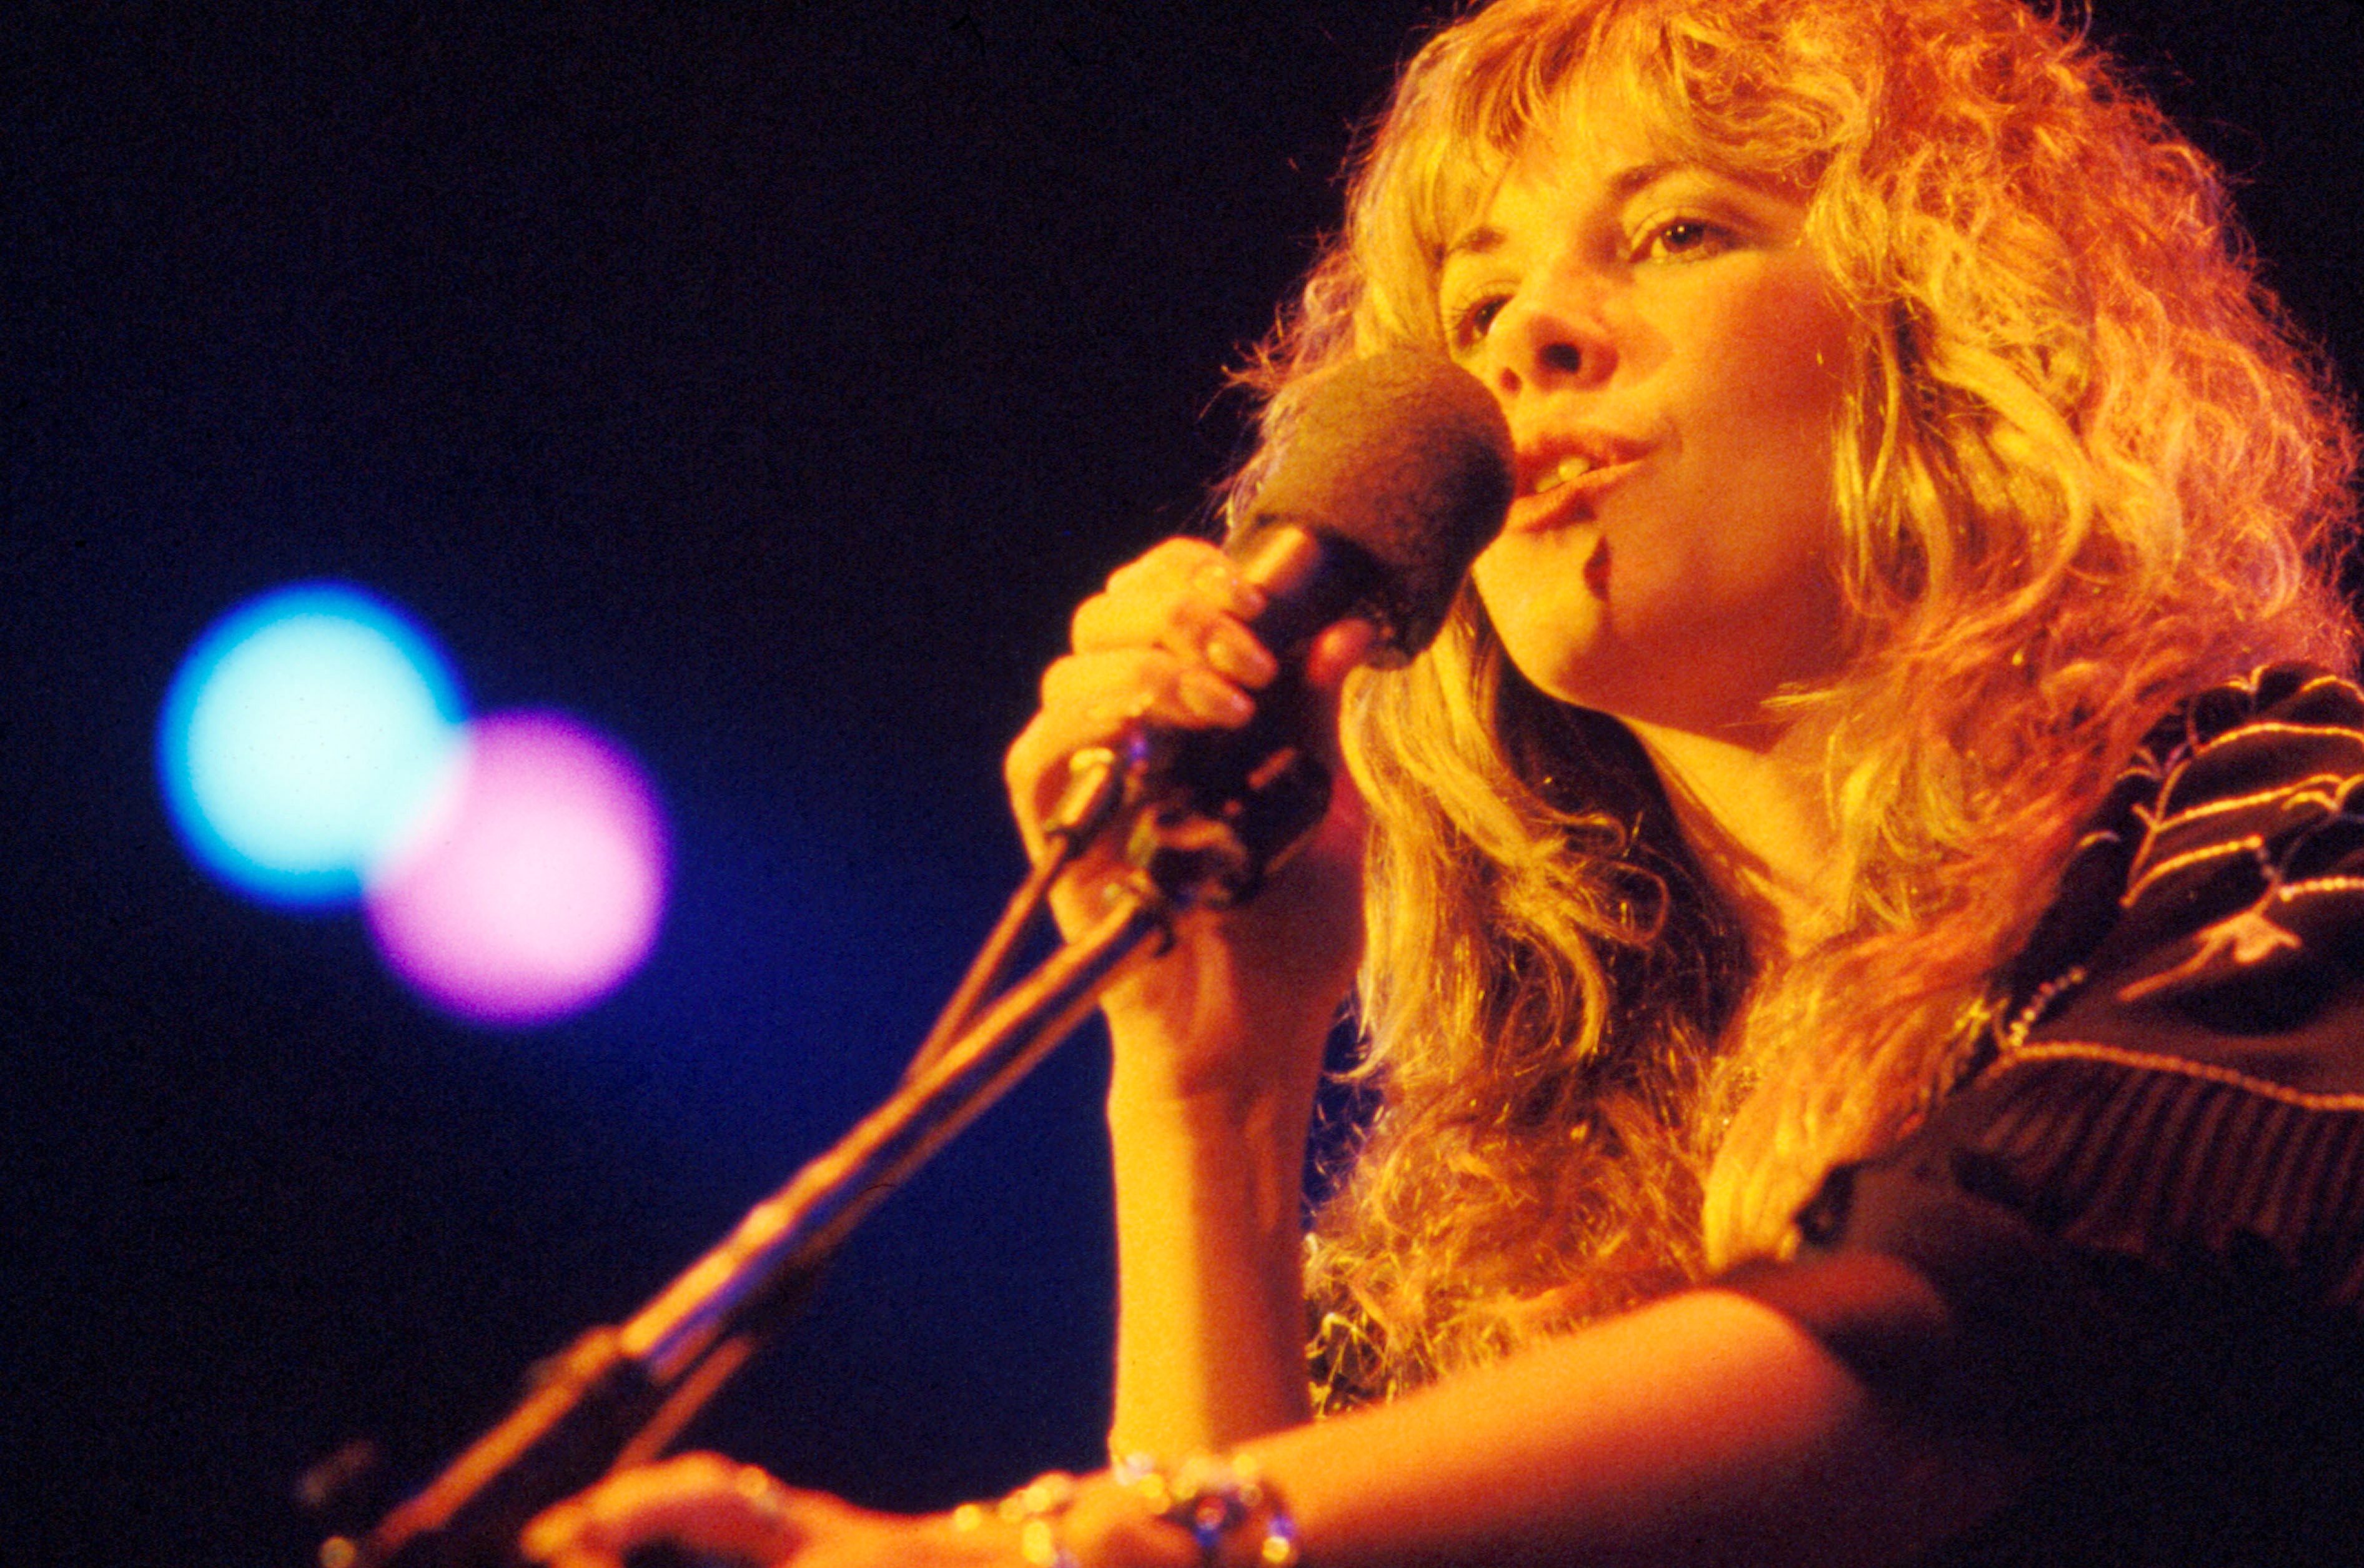 Stevie Nicks wears a black and white striped shirt and sings into a microphone.